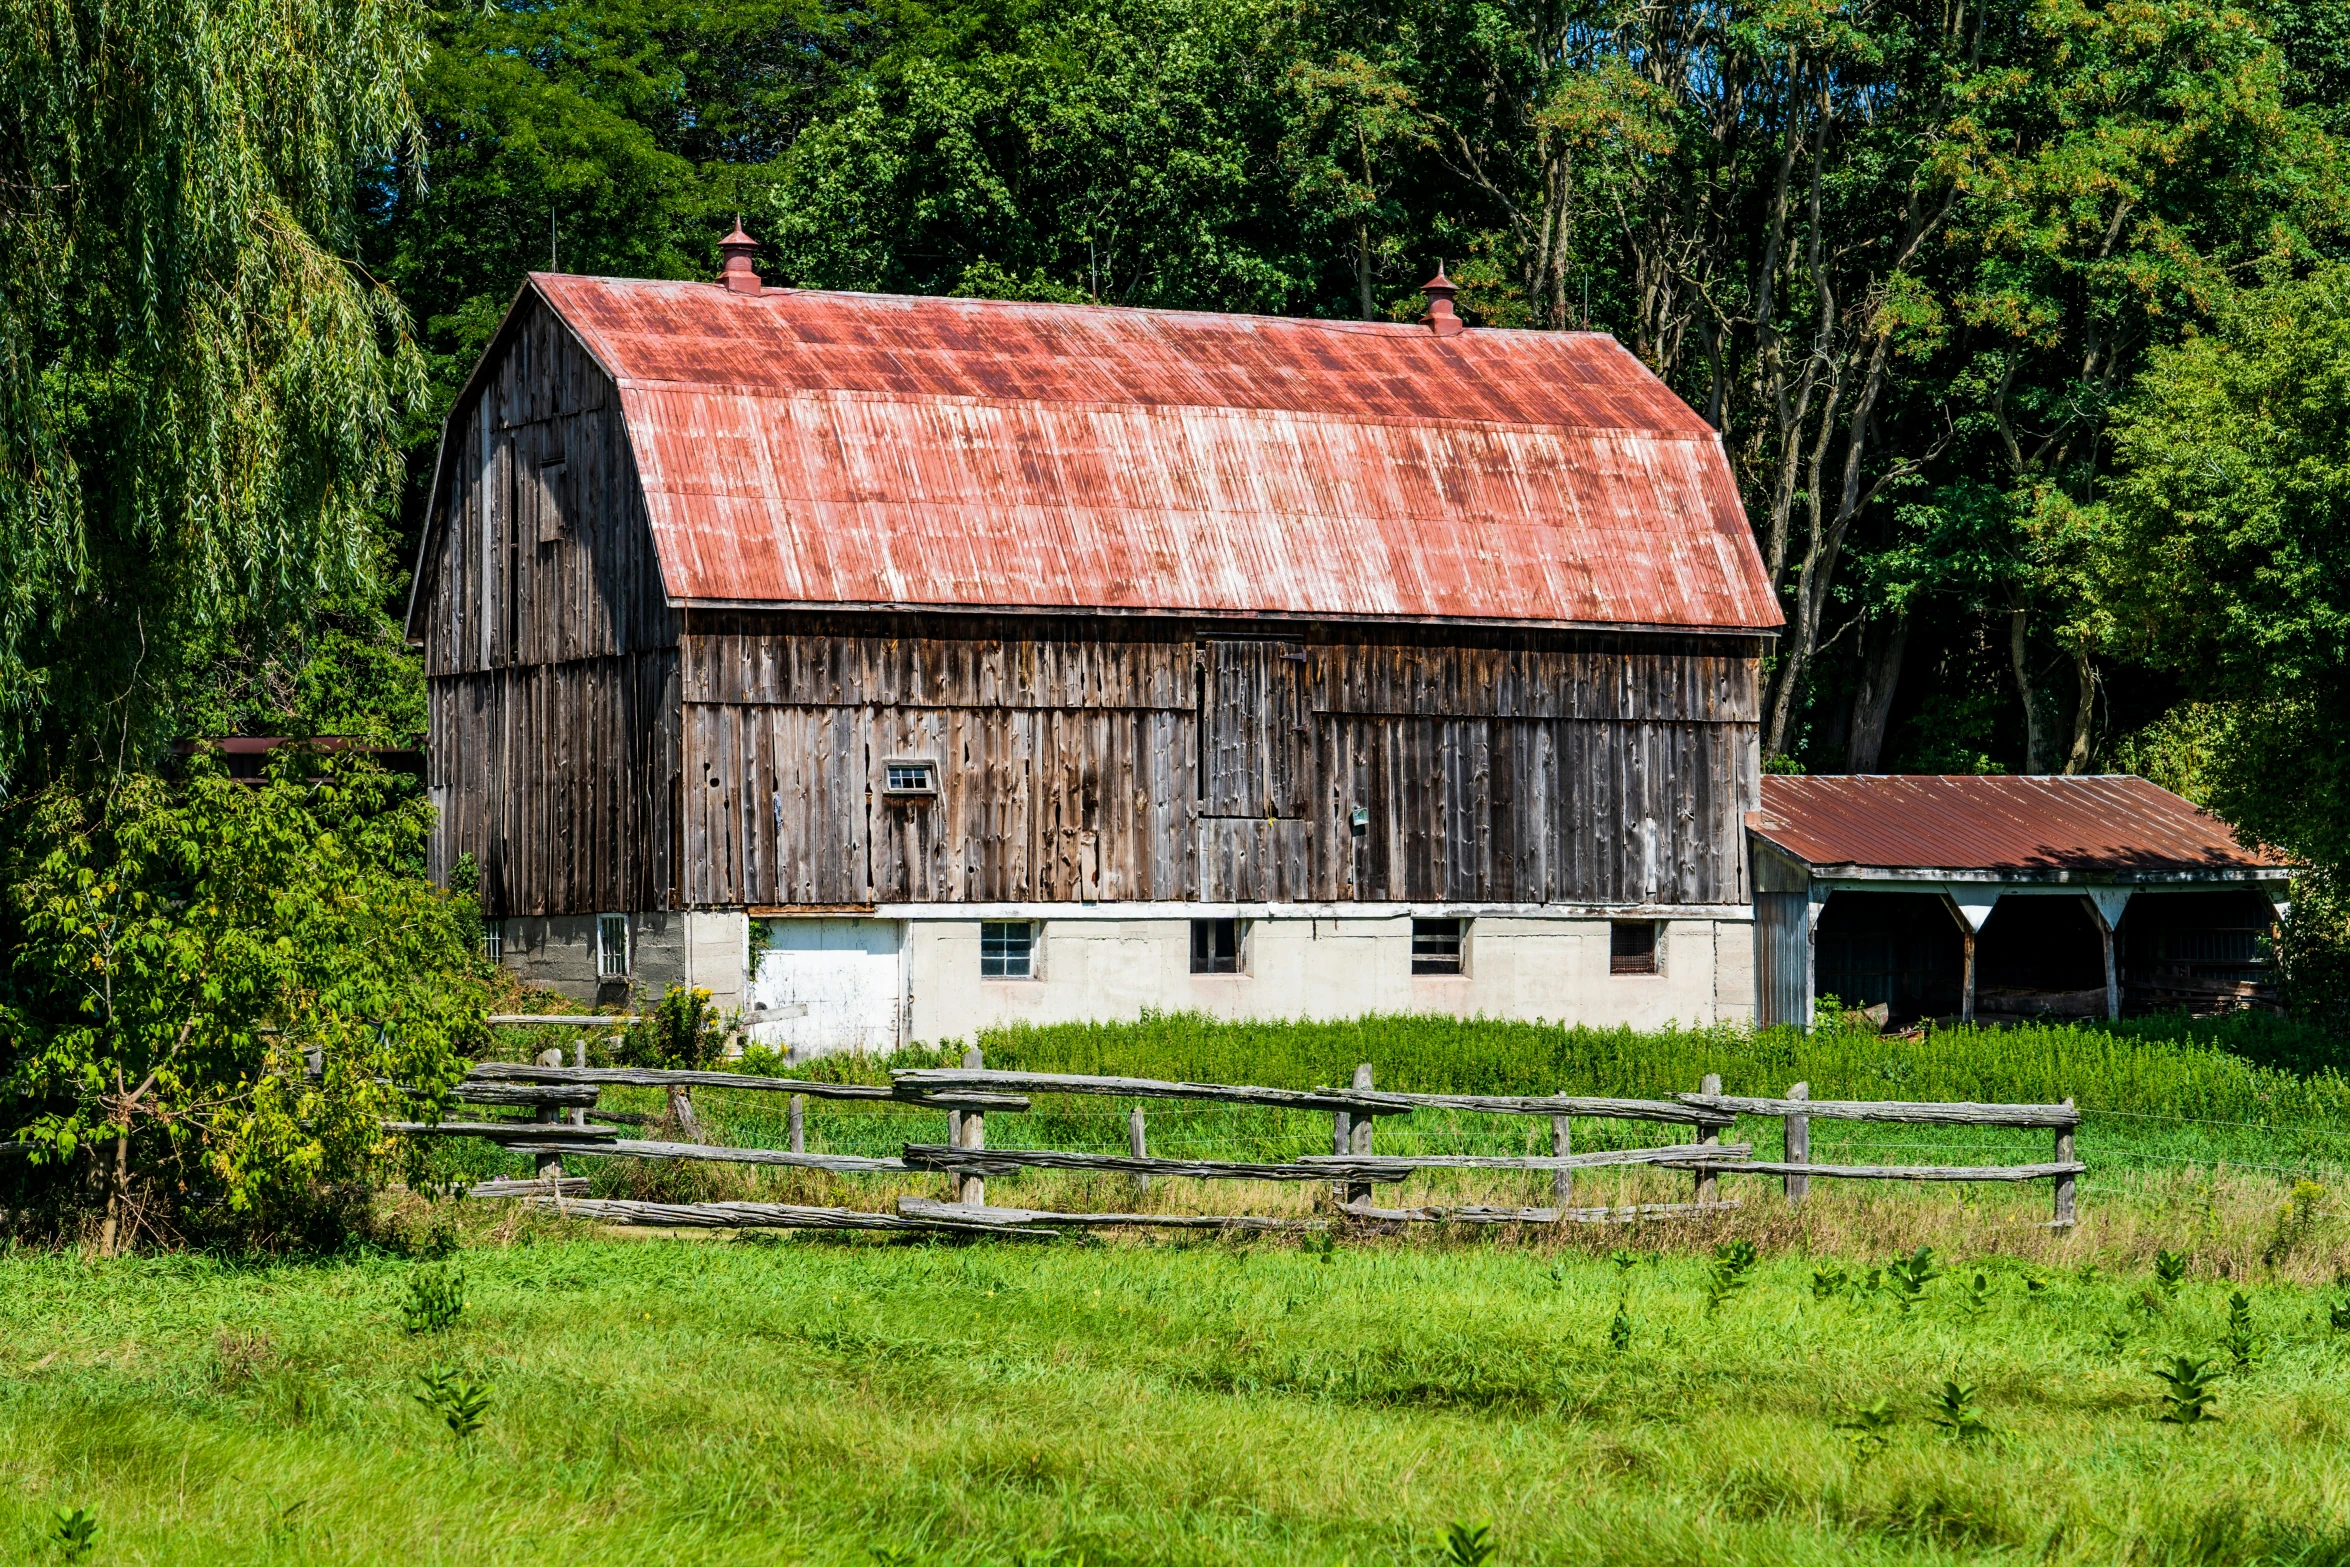 an old building is sitting in a field near trees